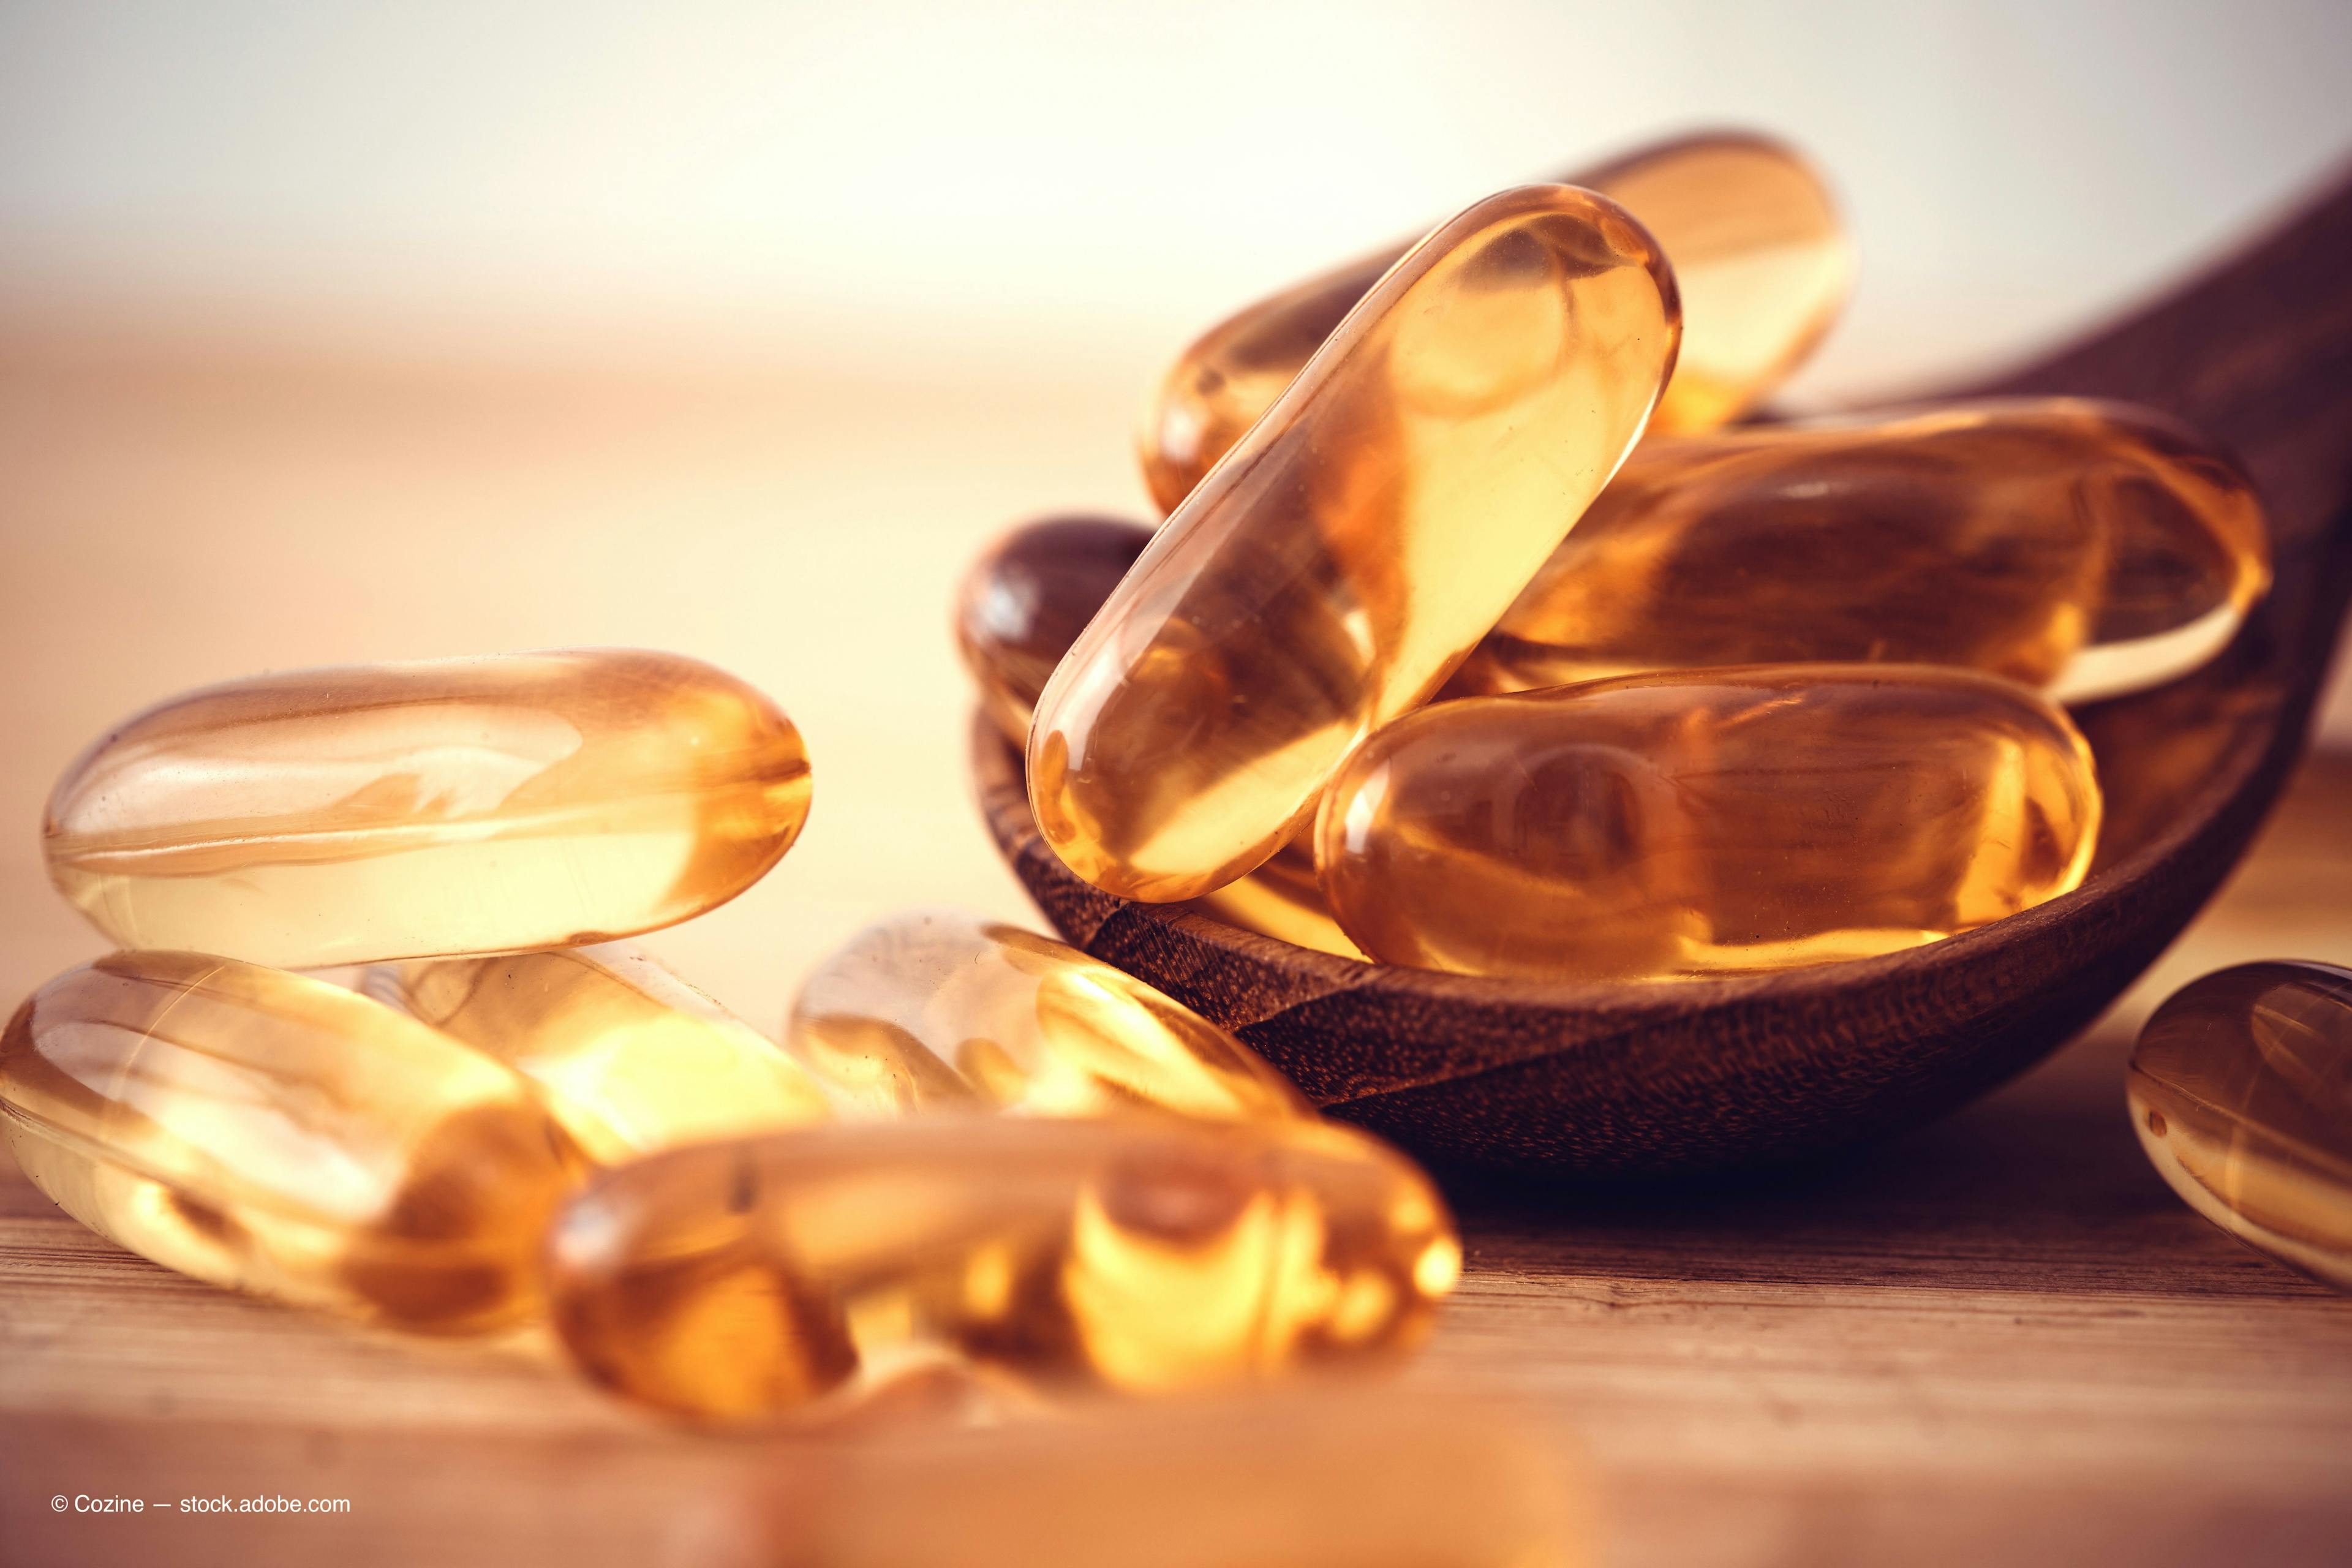 Conflicting evidence on Vitamin D efficacy in COVID-19 cases